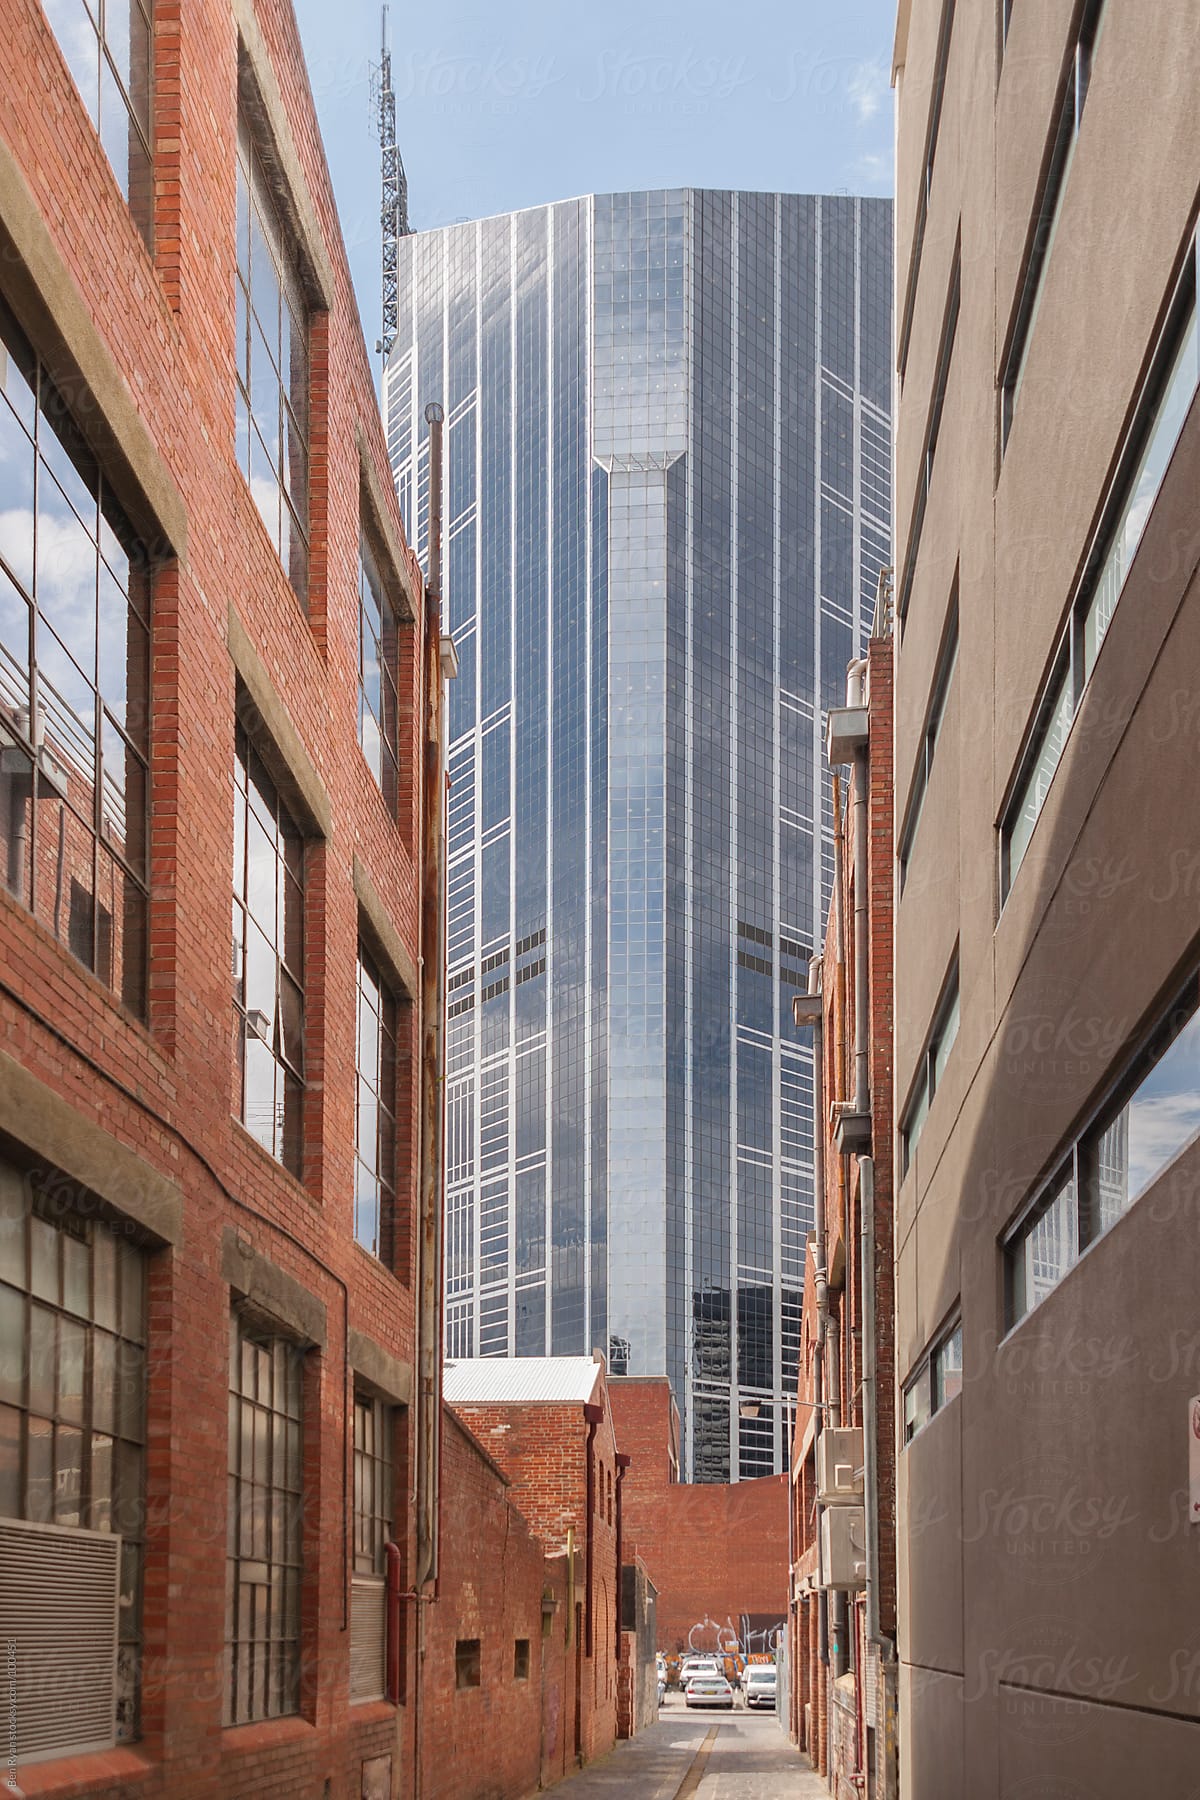 View down an historic alley to a modern skyscraper